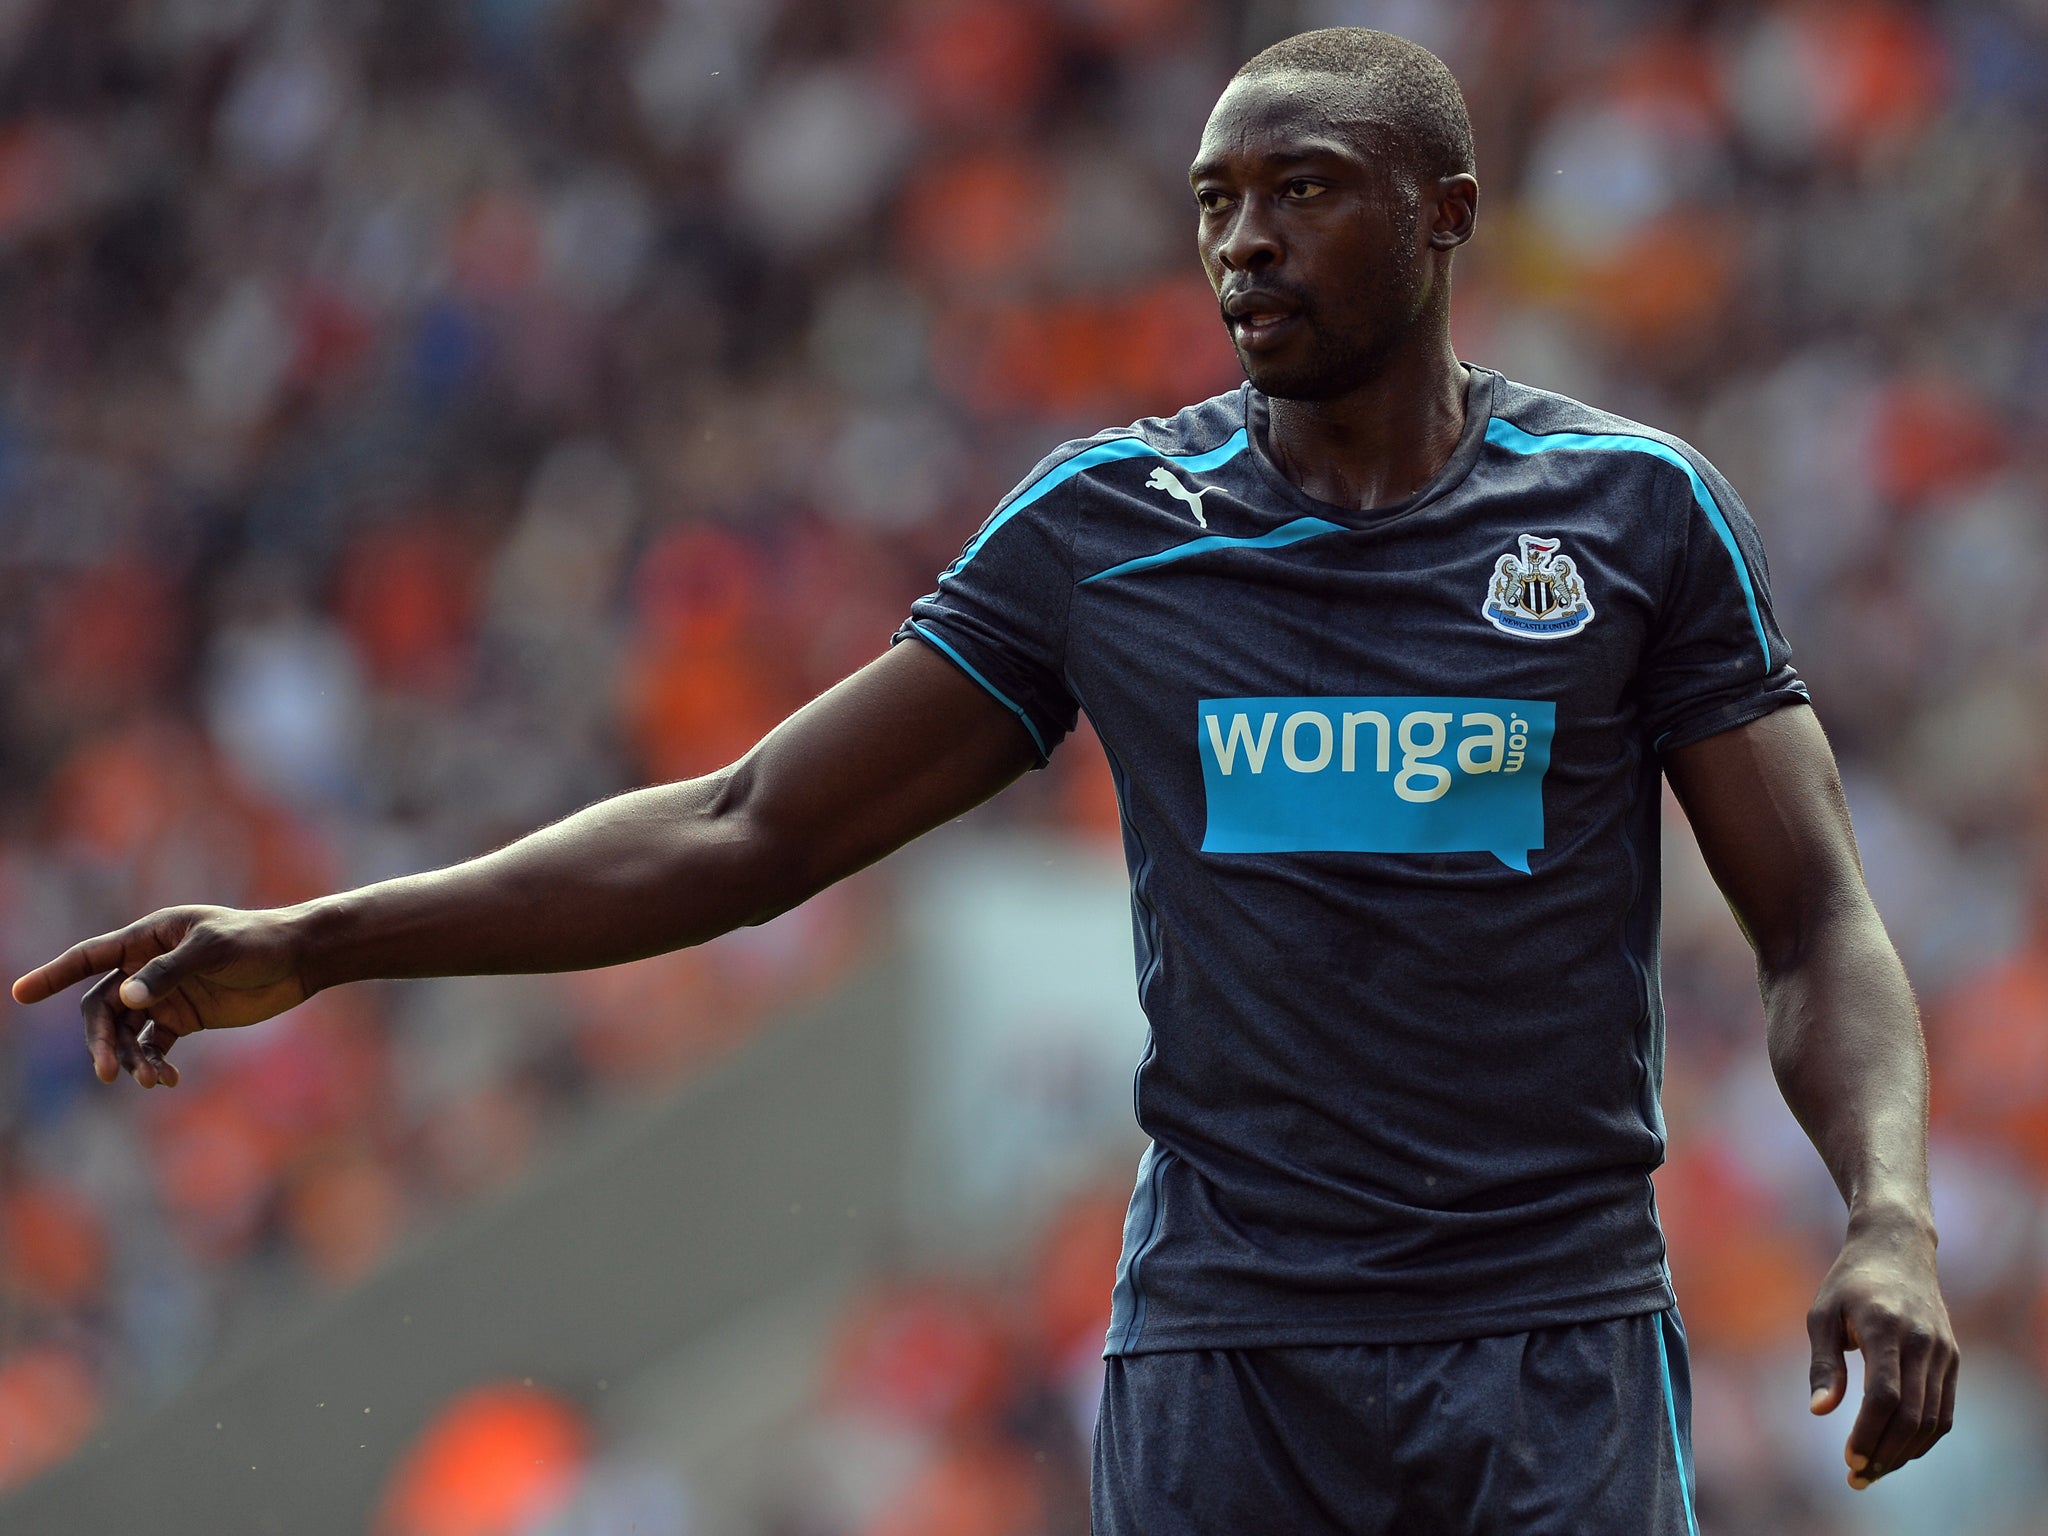 Shola Ameobi in pre-season action against Blackpool wearing the controversial 'Wonga' sponsored shirt that has seen a dispute arise with Pappiss Demba Cisse